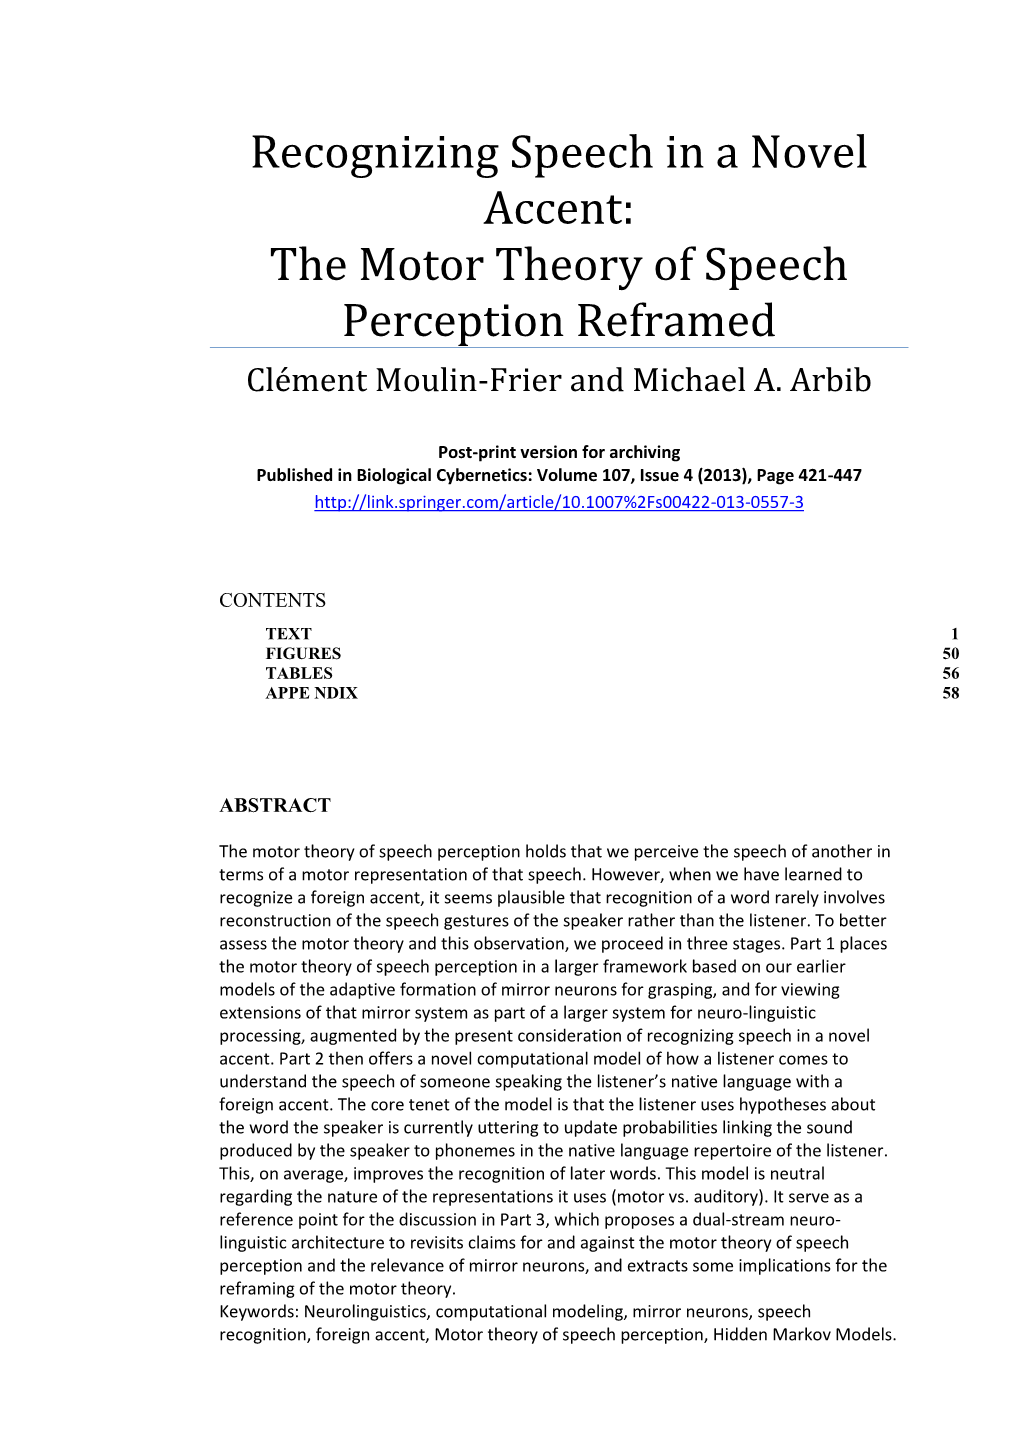 The Motor Theory of Speech Perception Reframed Clément Moulin-Frier and Michael A